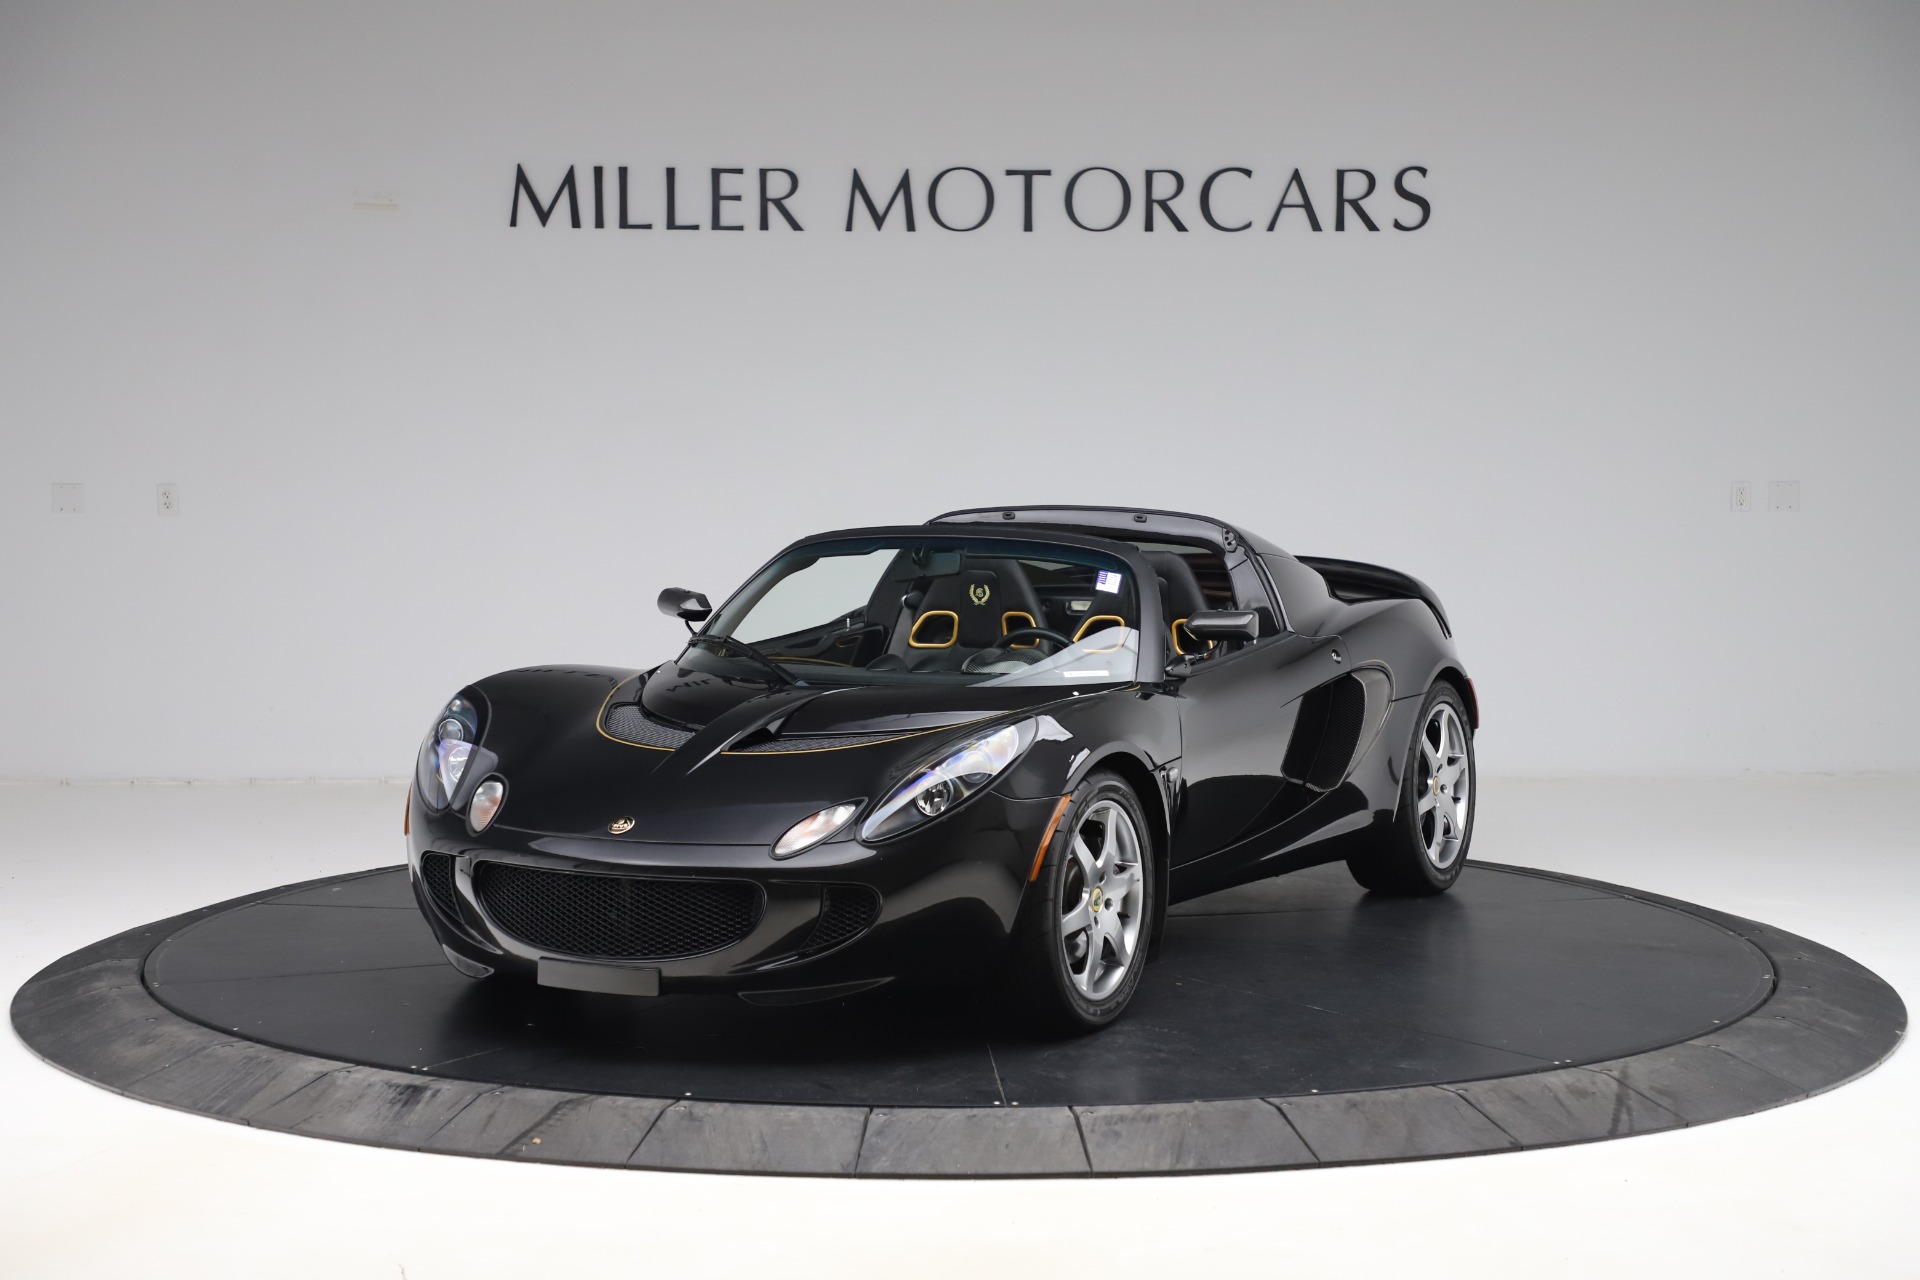 Used 2007 Lotus Elise Type 72D for sale Sold at Aston Martin of Greenwich in Greenwich CT 06830 1